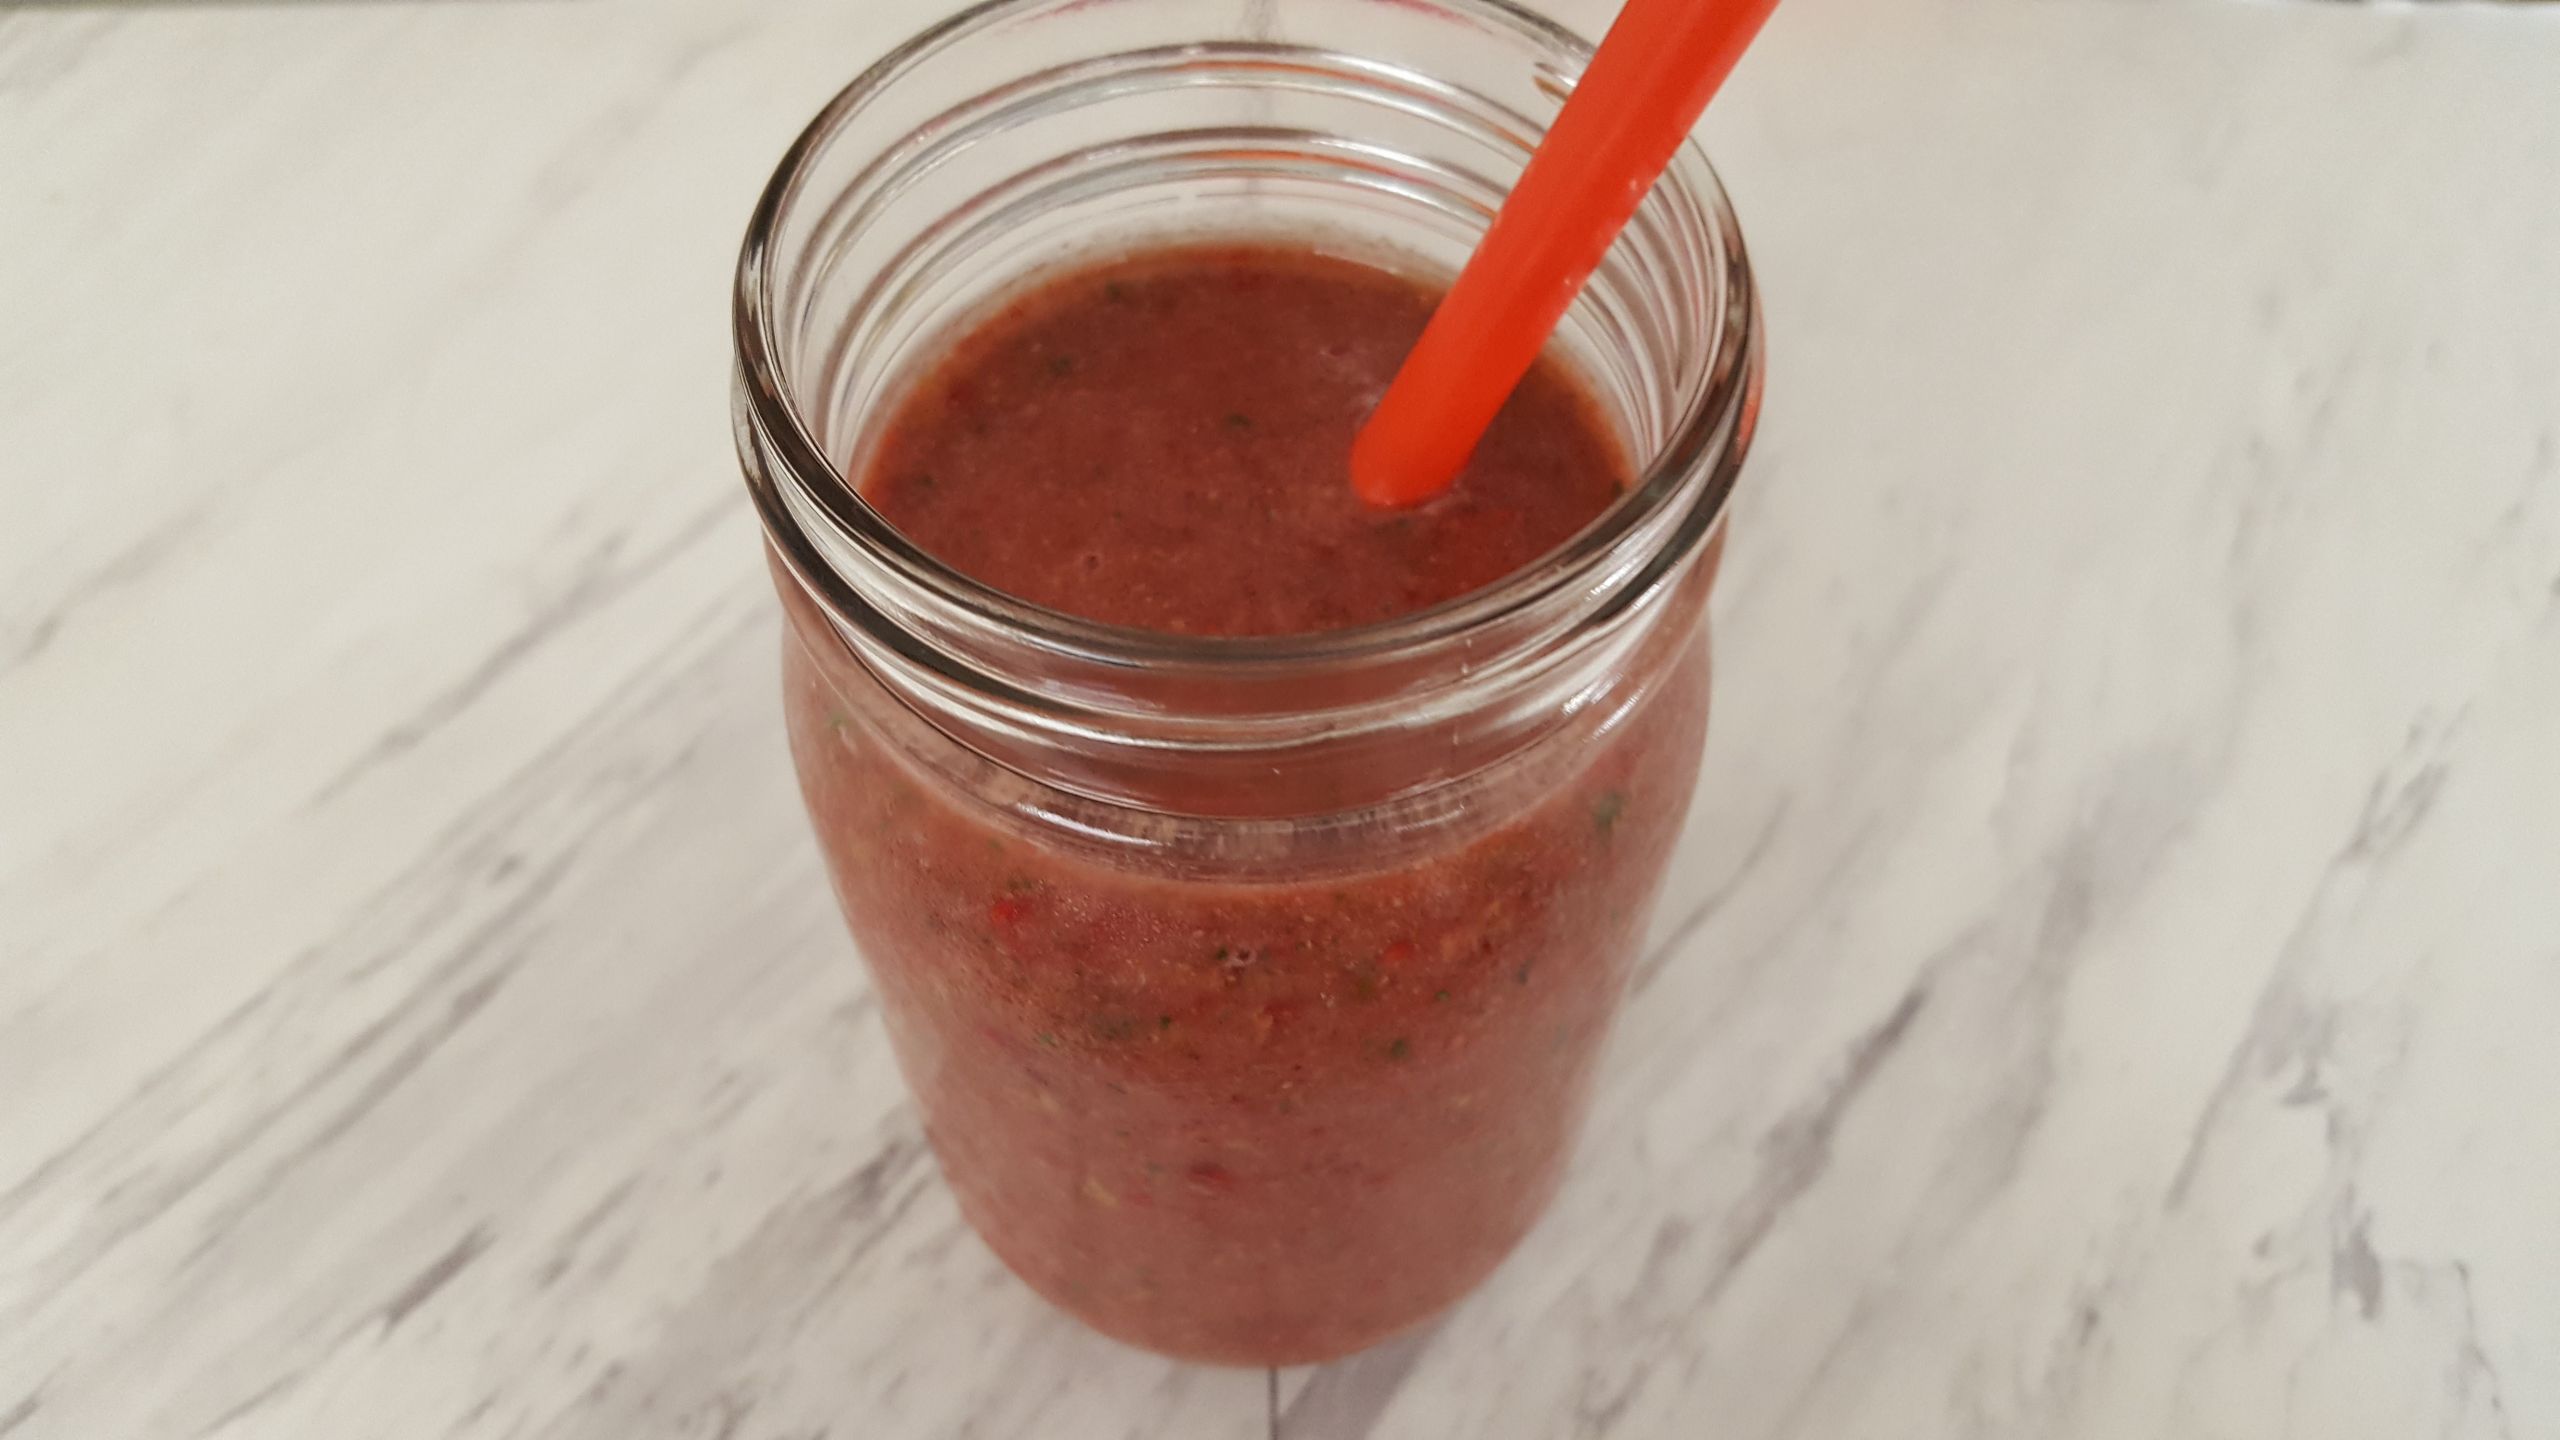 Dr Oz Detox Smoothies
 I Did The Dr Oz 3 Day Detox Smoothie Cleanse – Couch